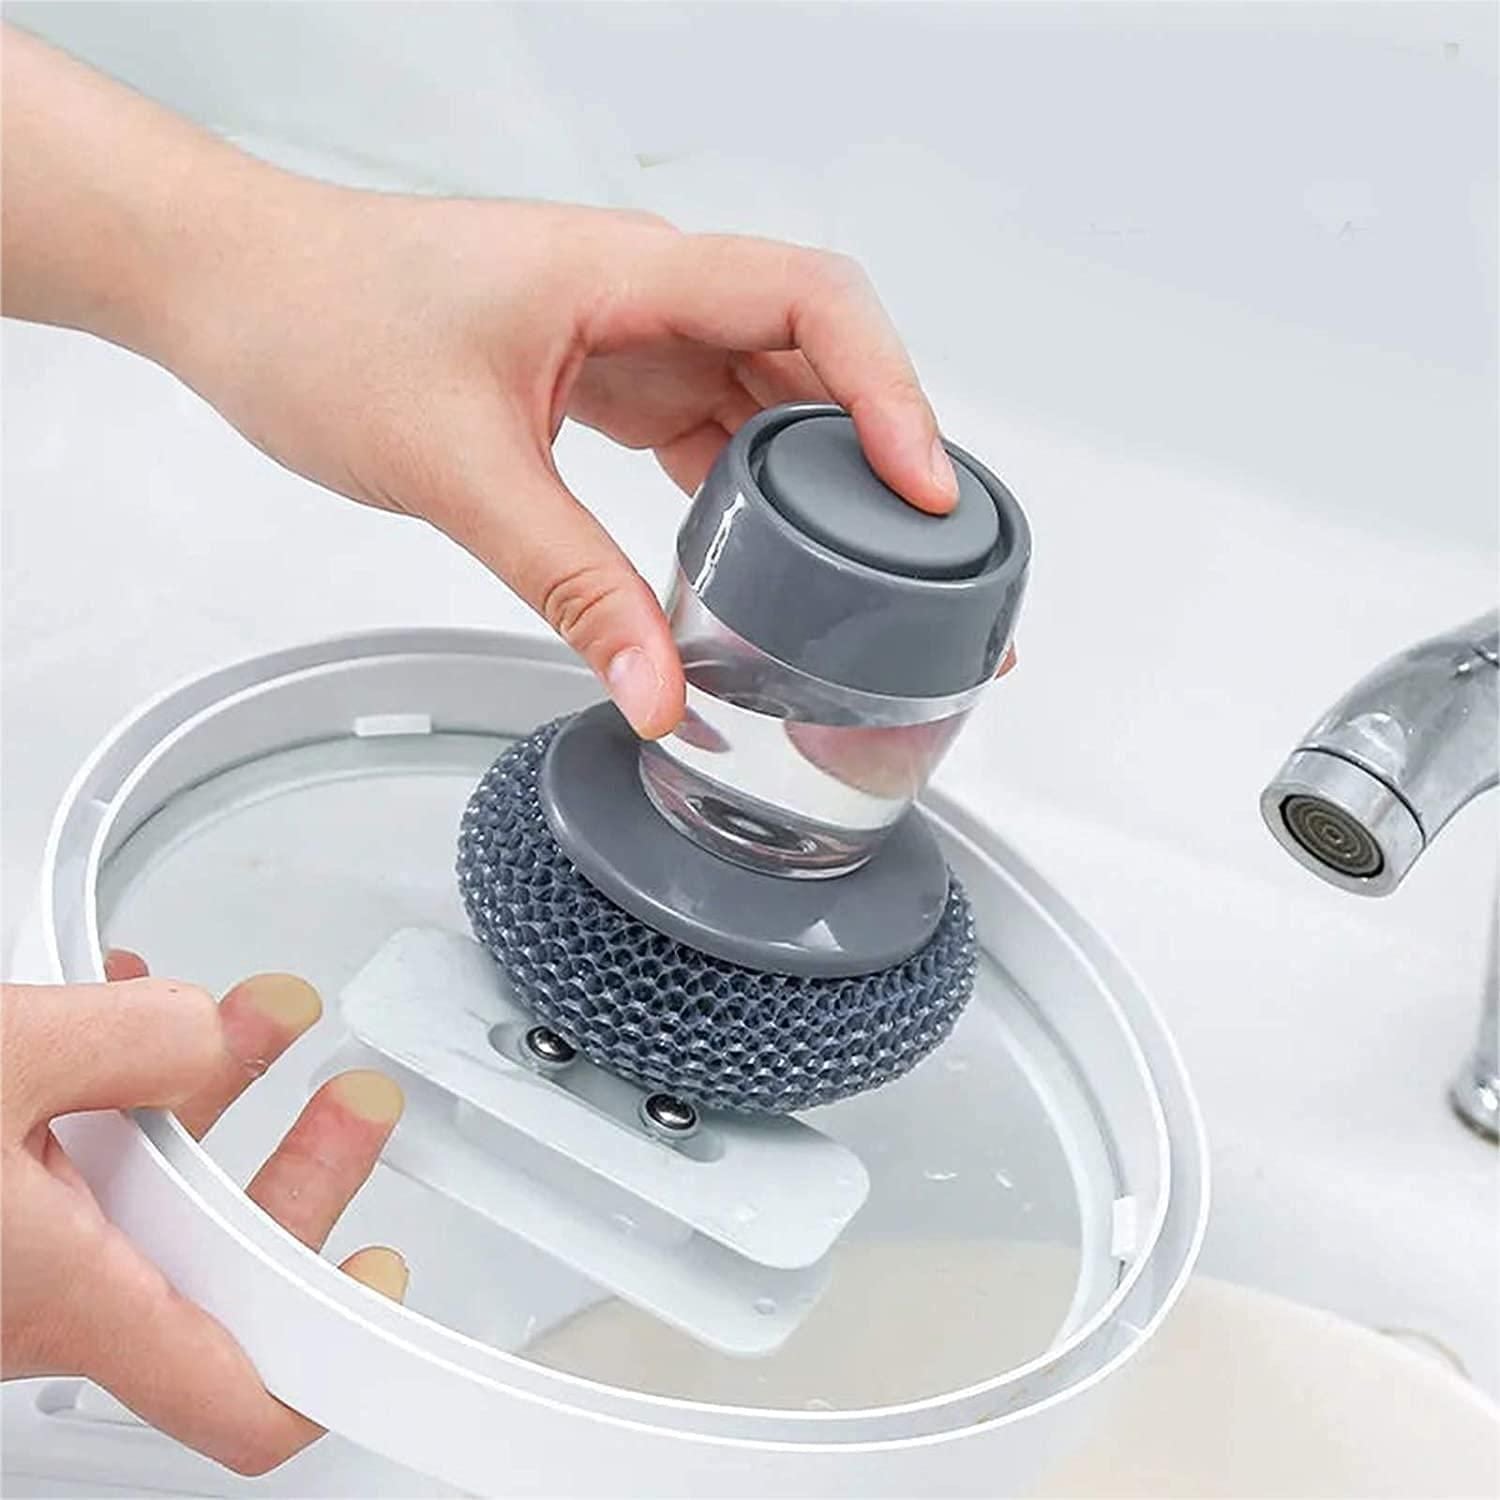 Kitchen Soap Dispensing Palm Brush Washing - Premium  from Roposo Clout - Just $500! Shop now at Mystical9